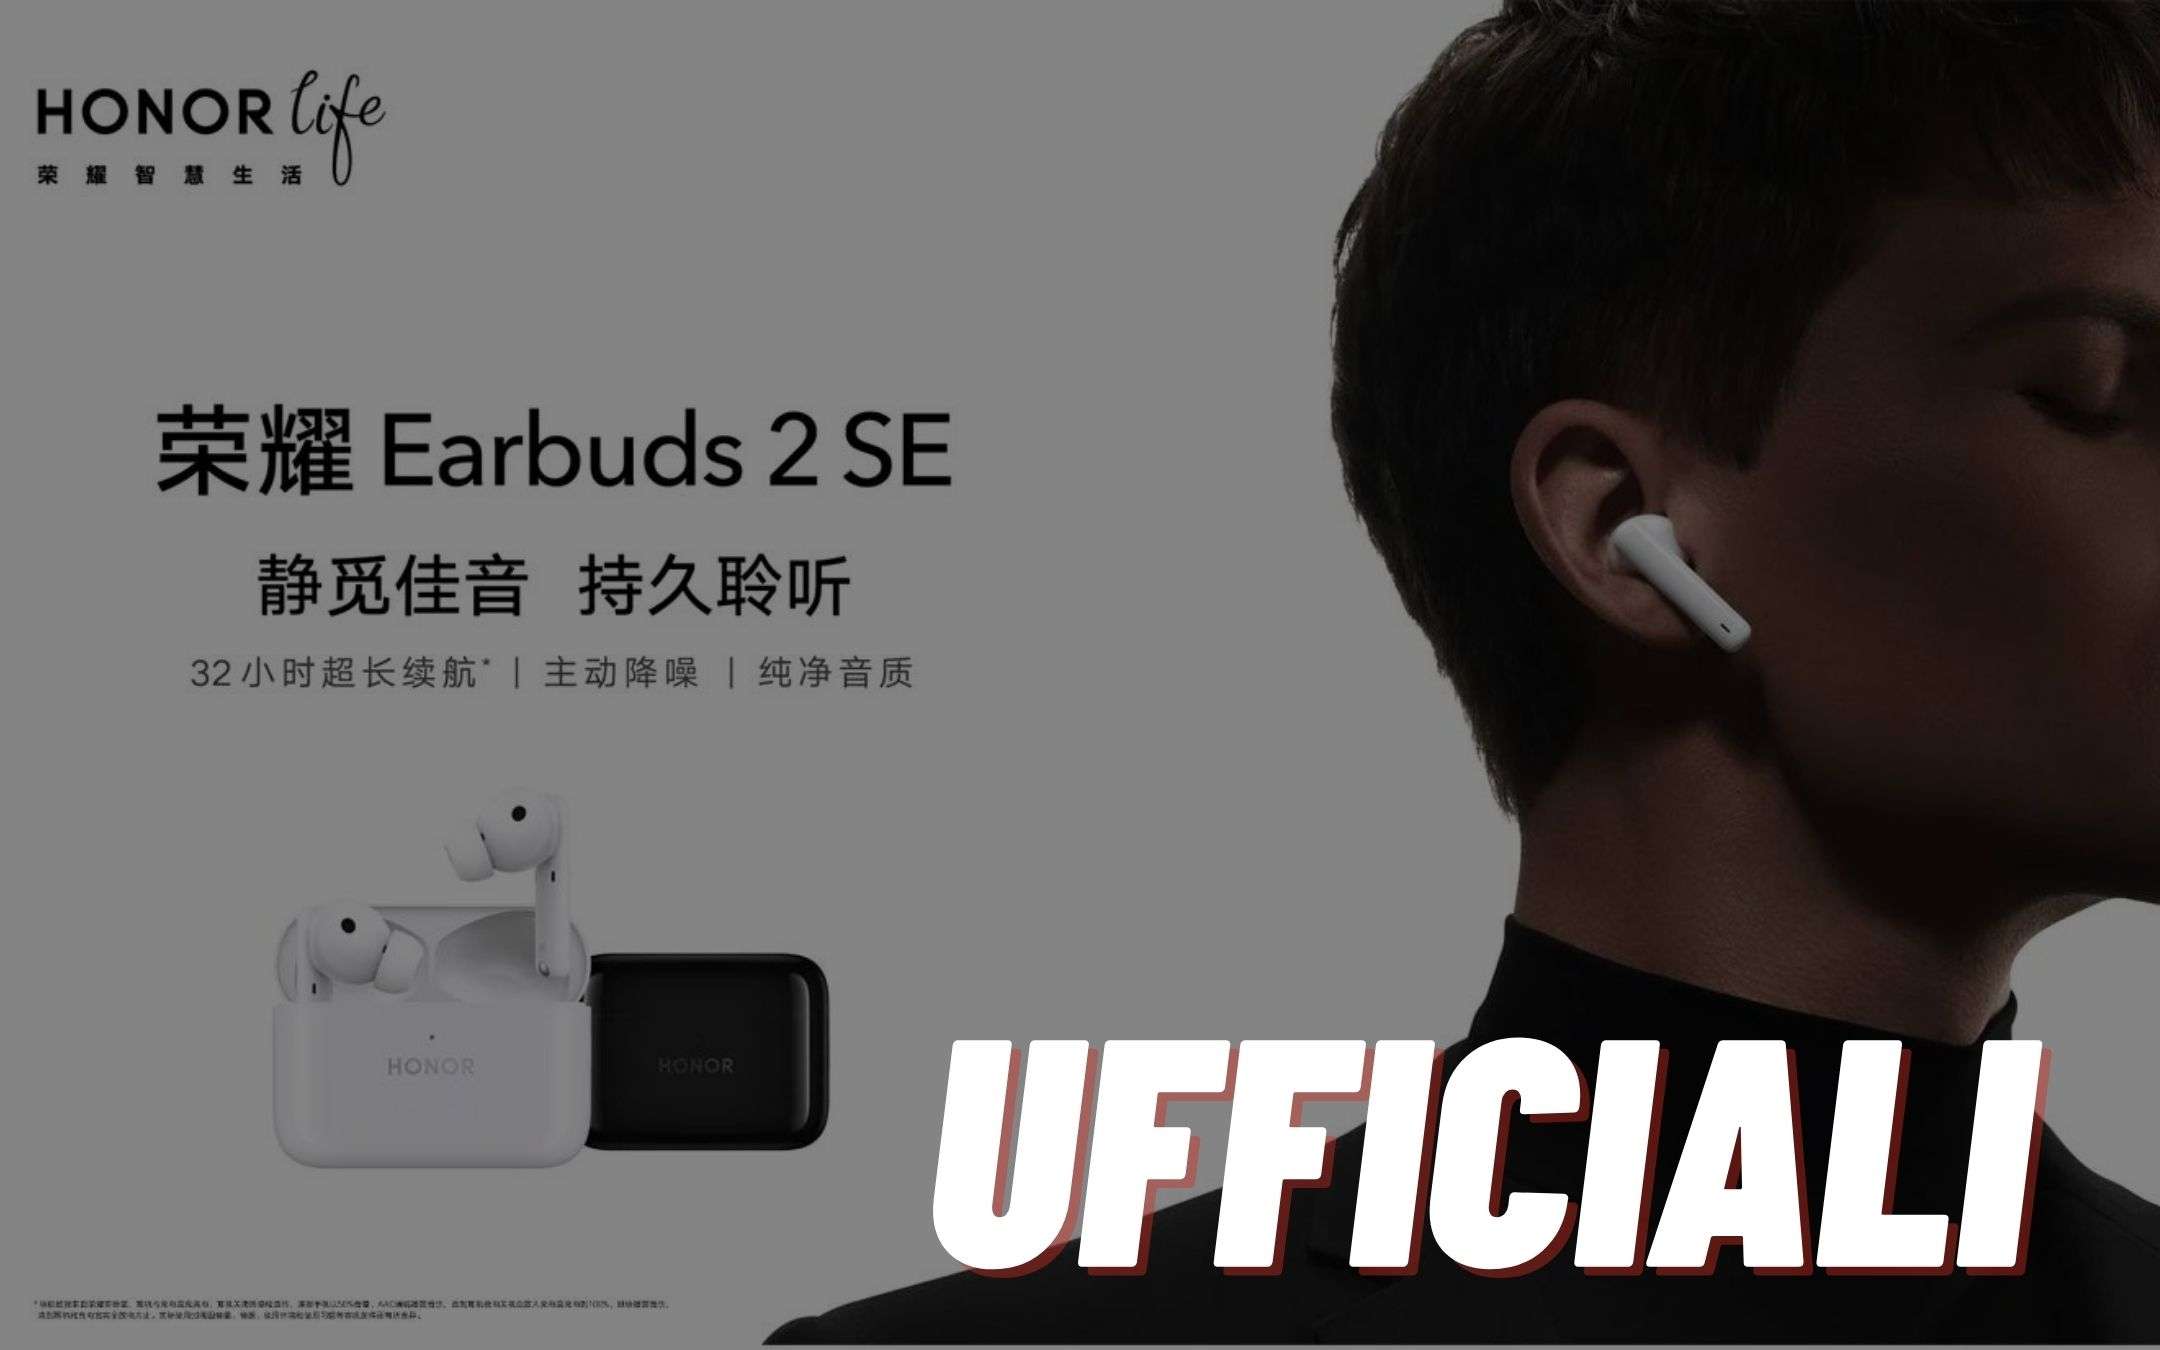 Honor Earbuds 2 SE: UFFICIALI, low-cost con ANC